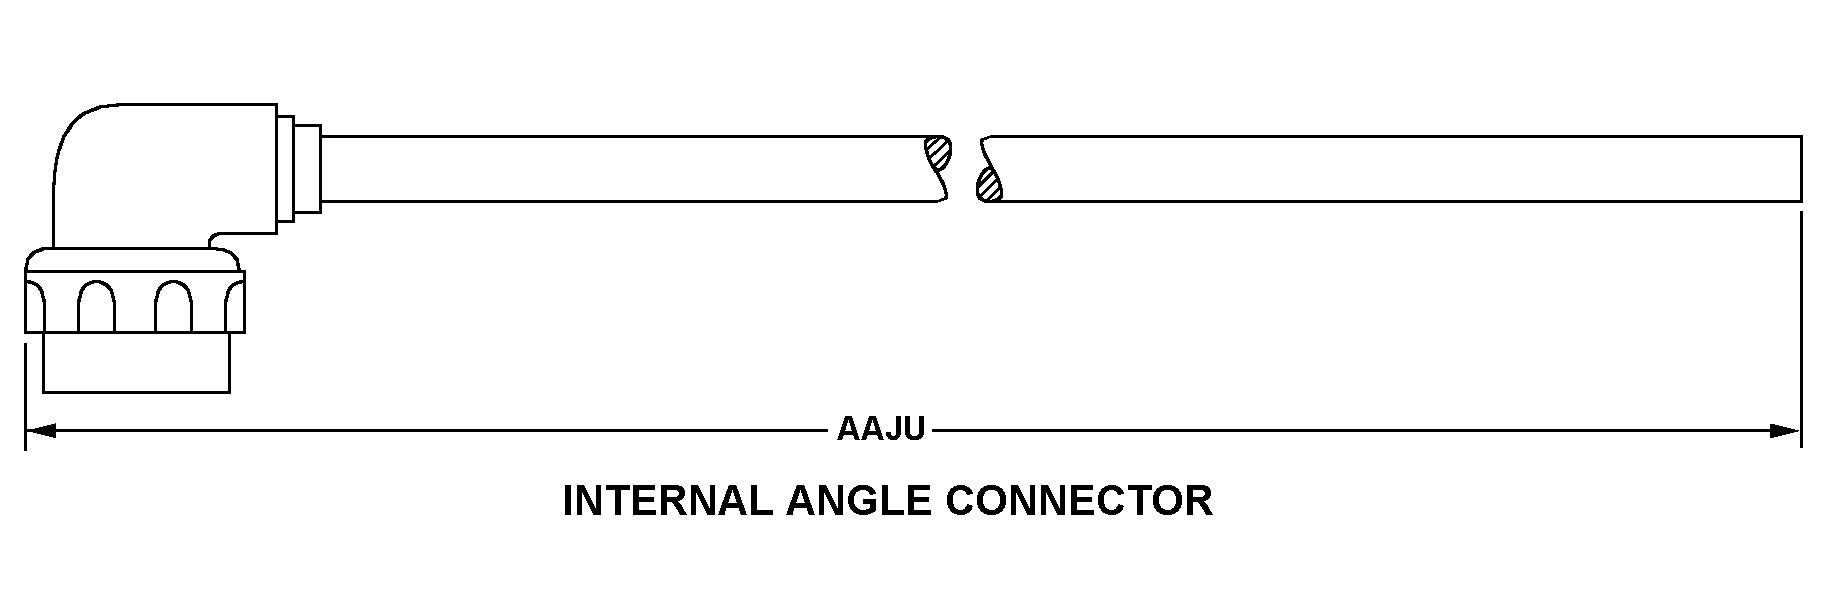 INTERNAL ANGLE CONNECTOR style nsn 5995-00-006-2237